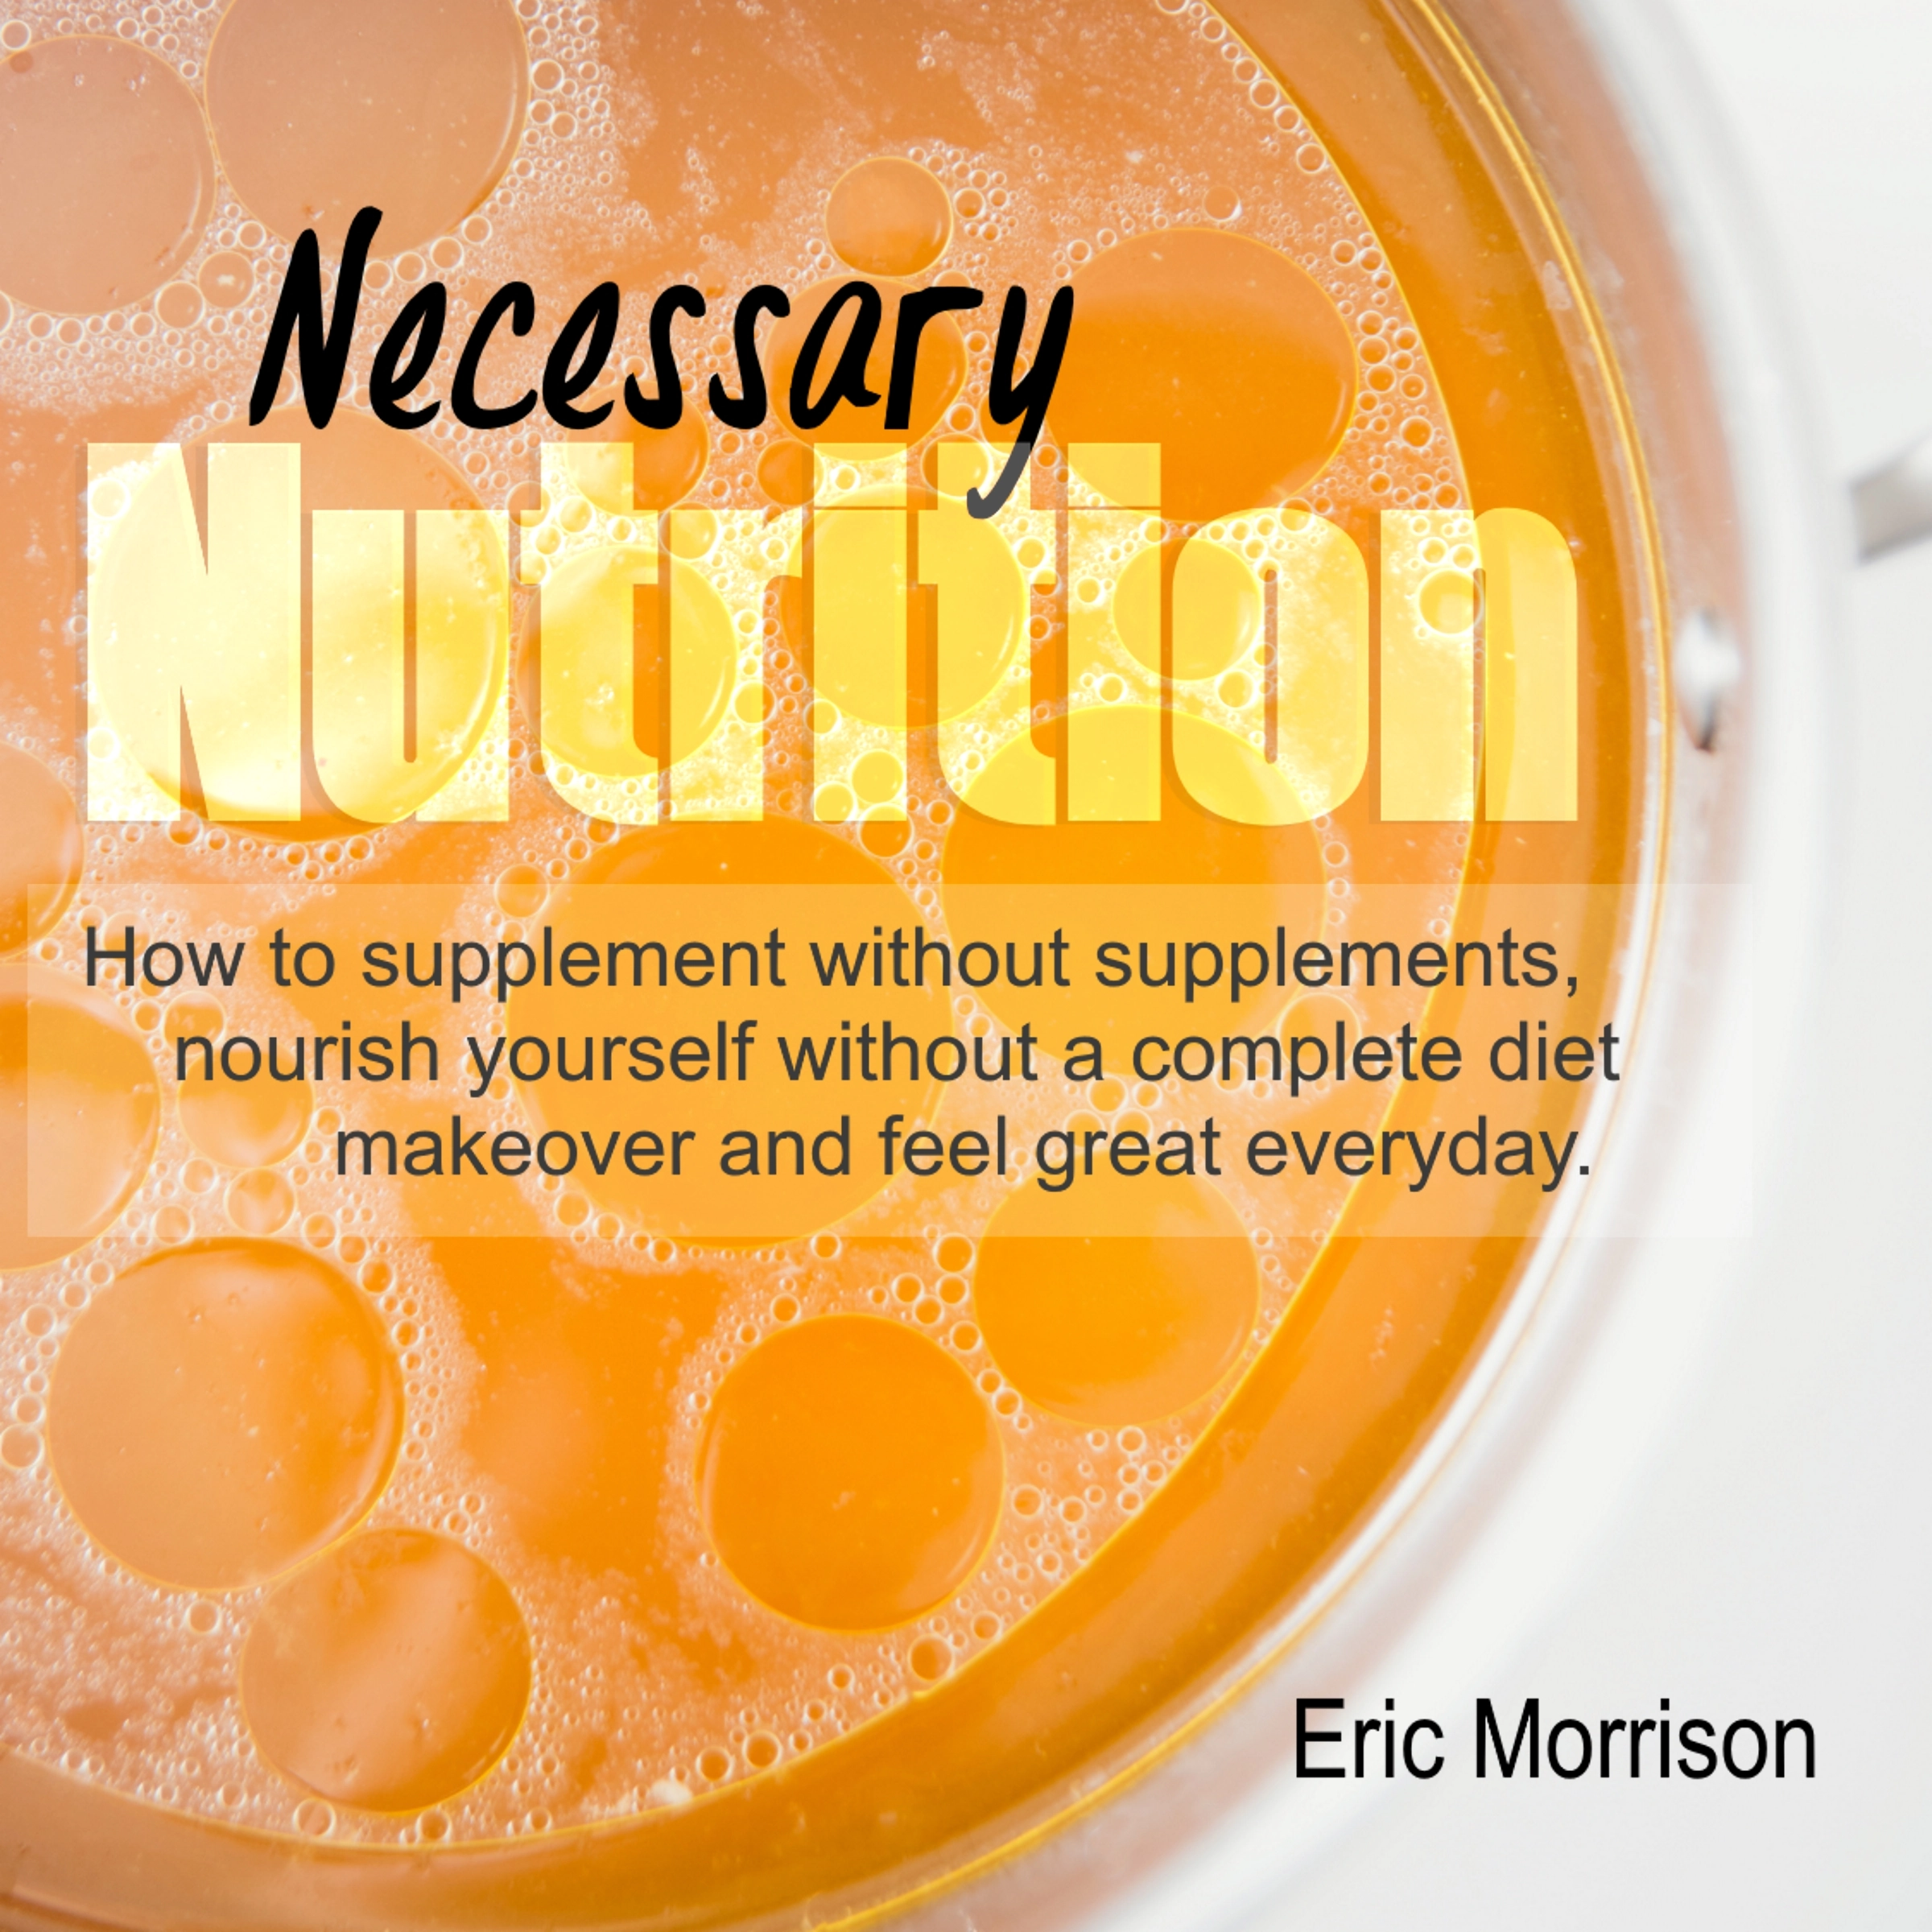 Necessary Nutrition: How To Supplement Without Supplements, Nourish Yourself Without A Complete Diet Makeover And Feel Great Everyday Audiobook by Eric Morrison